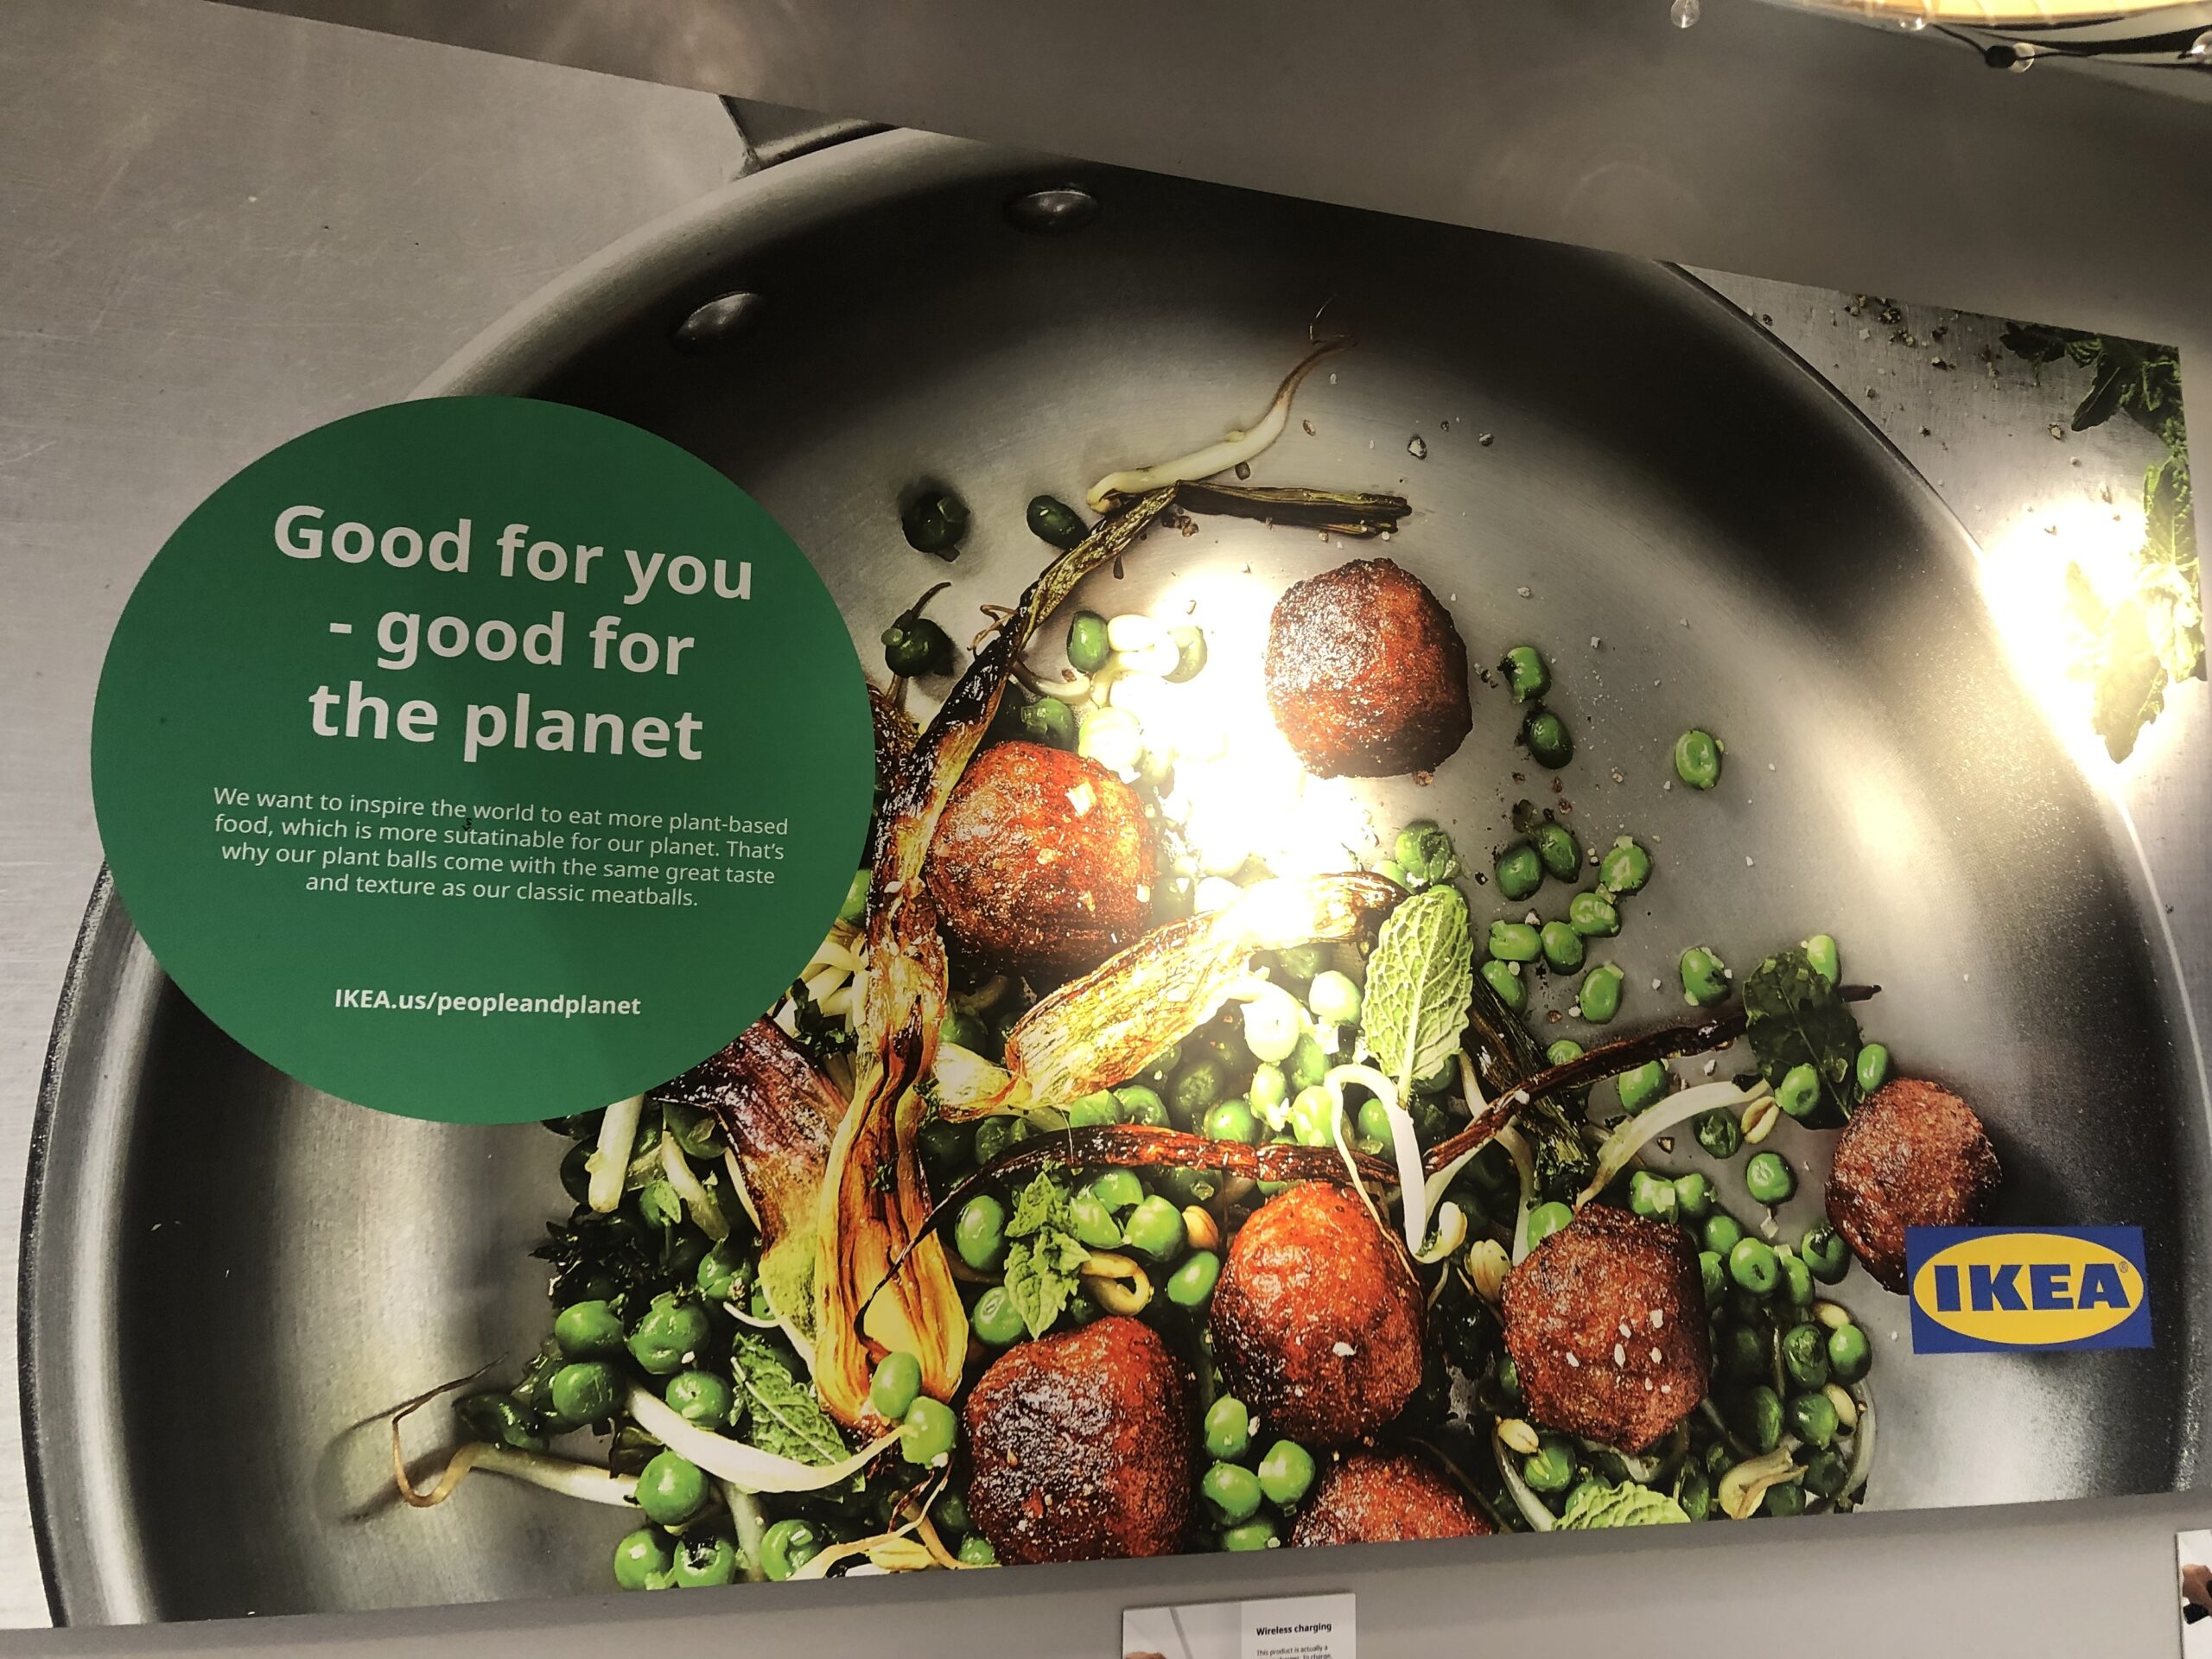 IKEA now offers alternative Swedish “plant balls.” These tasty plant-based “meatballs” have four percent of the climate footprint of a traditional meatball. By 2025, IKEA hopes to have 80 percent of its packaged food be vegan. JENNY NOBLE